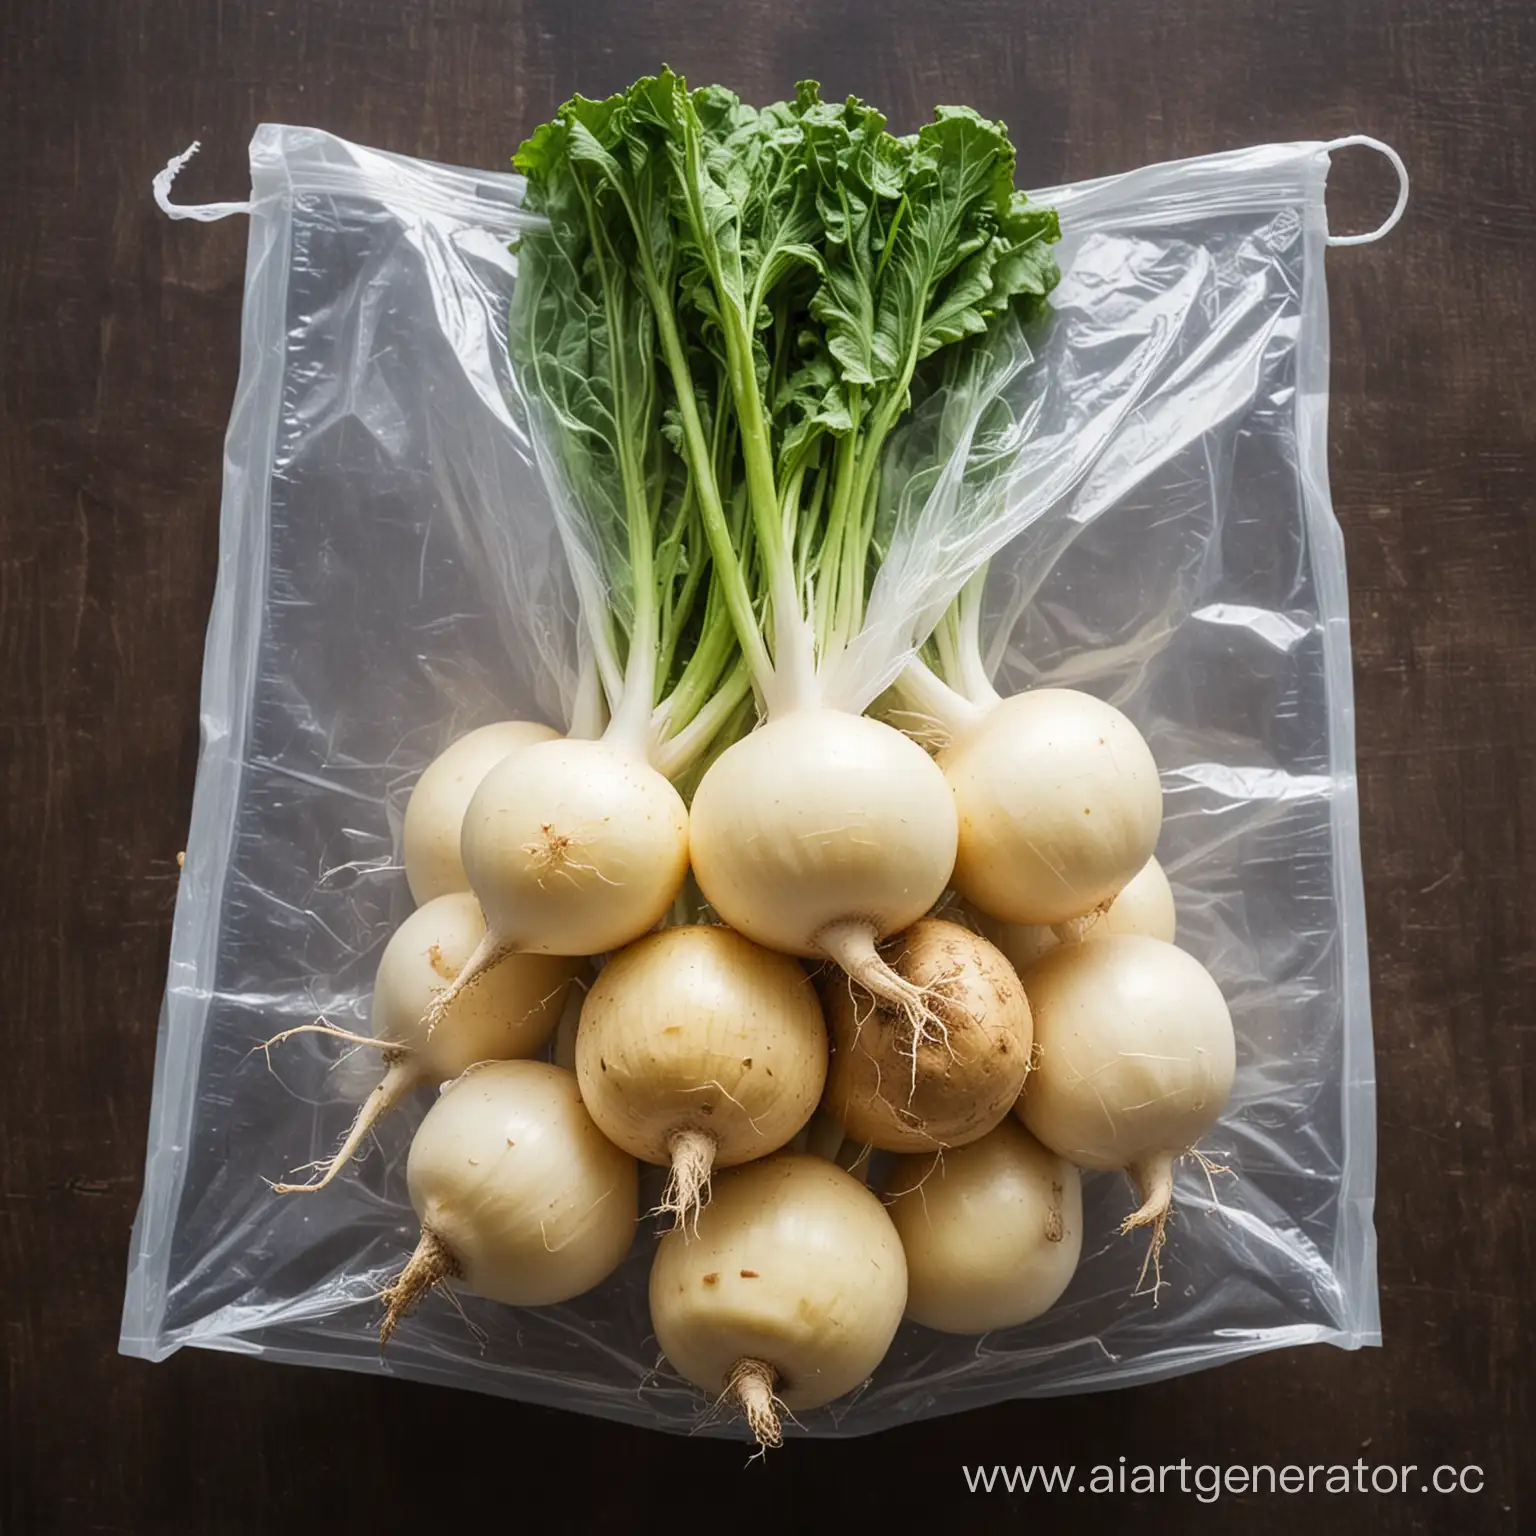 Fresh-Turnips-in-Clear-Plastic-Bag-for-Healthy-Snack-Option